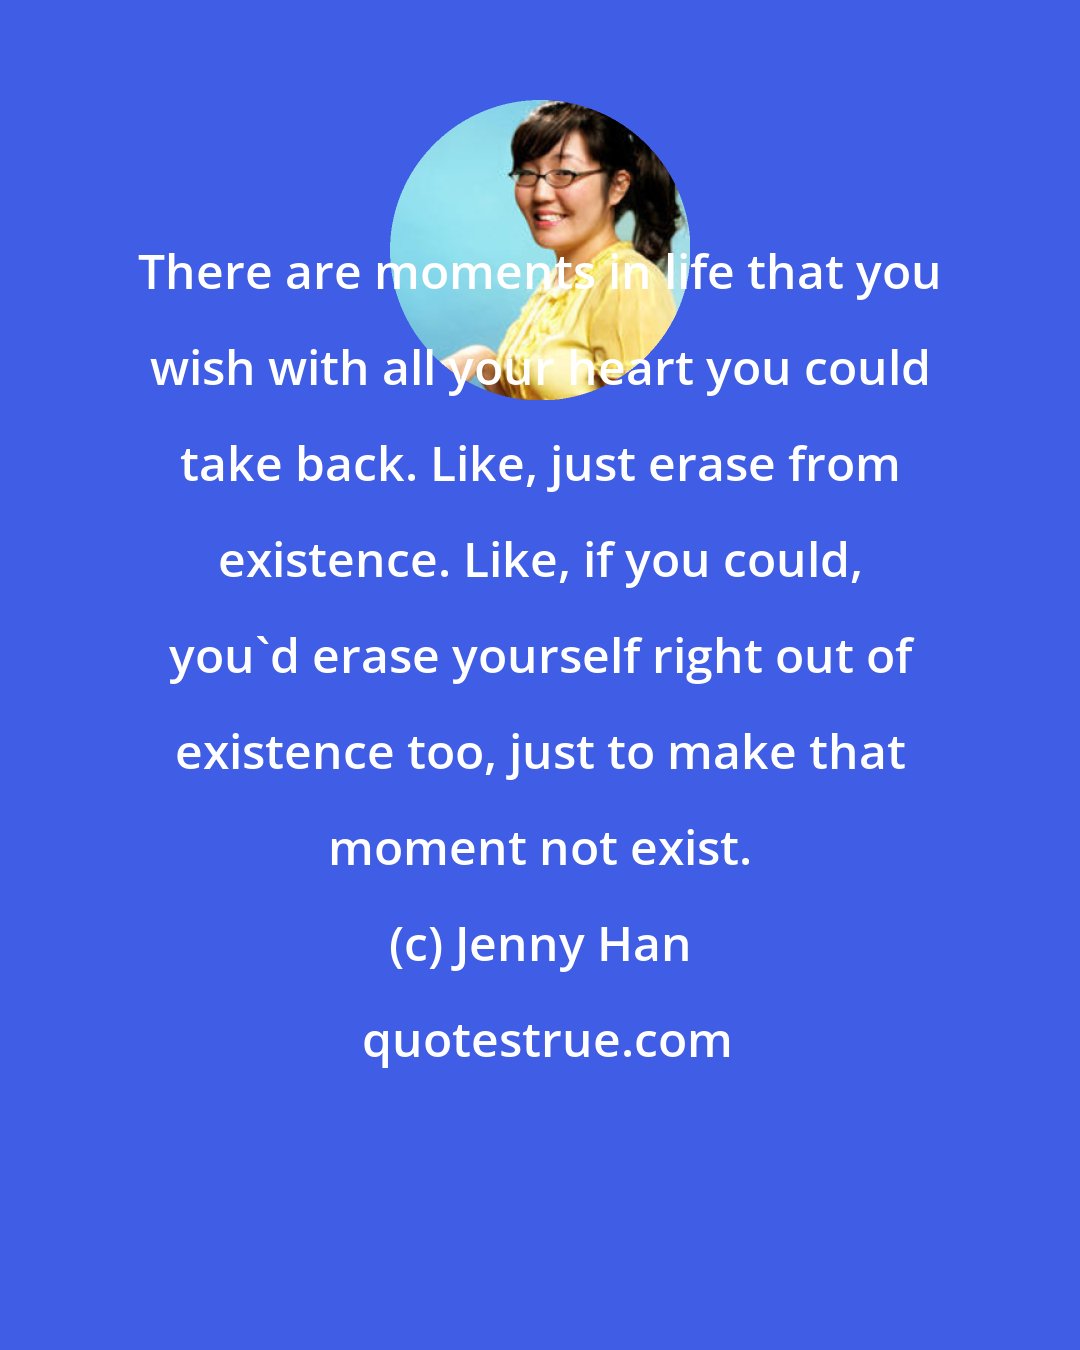 Jenny Han: There are moments in life that you wish with all your heart you could take back. Like, just erase from existence. Like, if you could, you'd erase yourself right out of existence too, just to make that moment not exist.